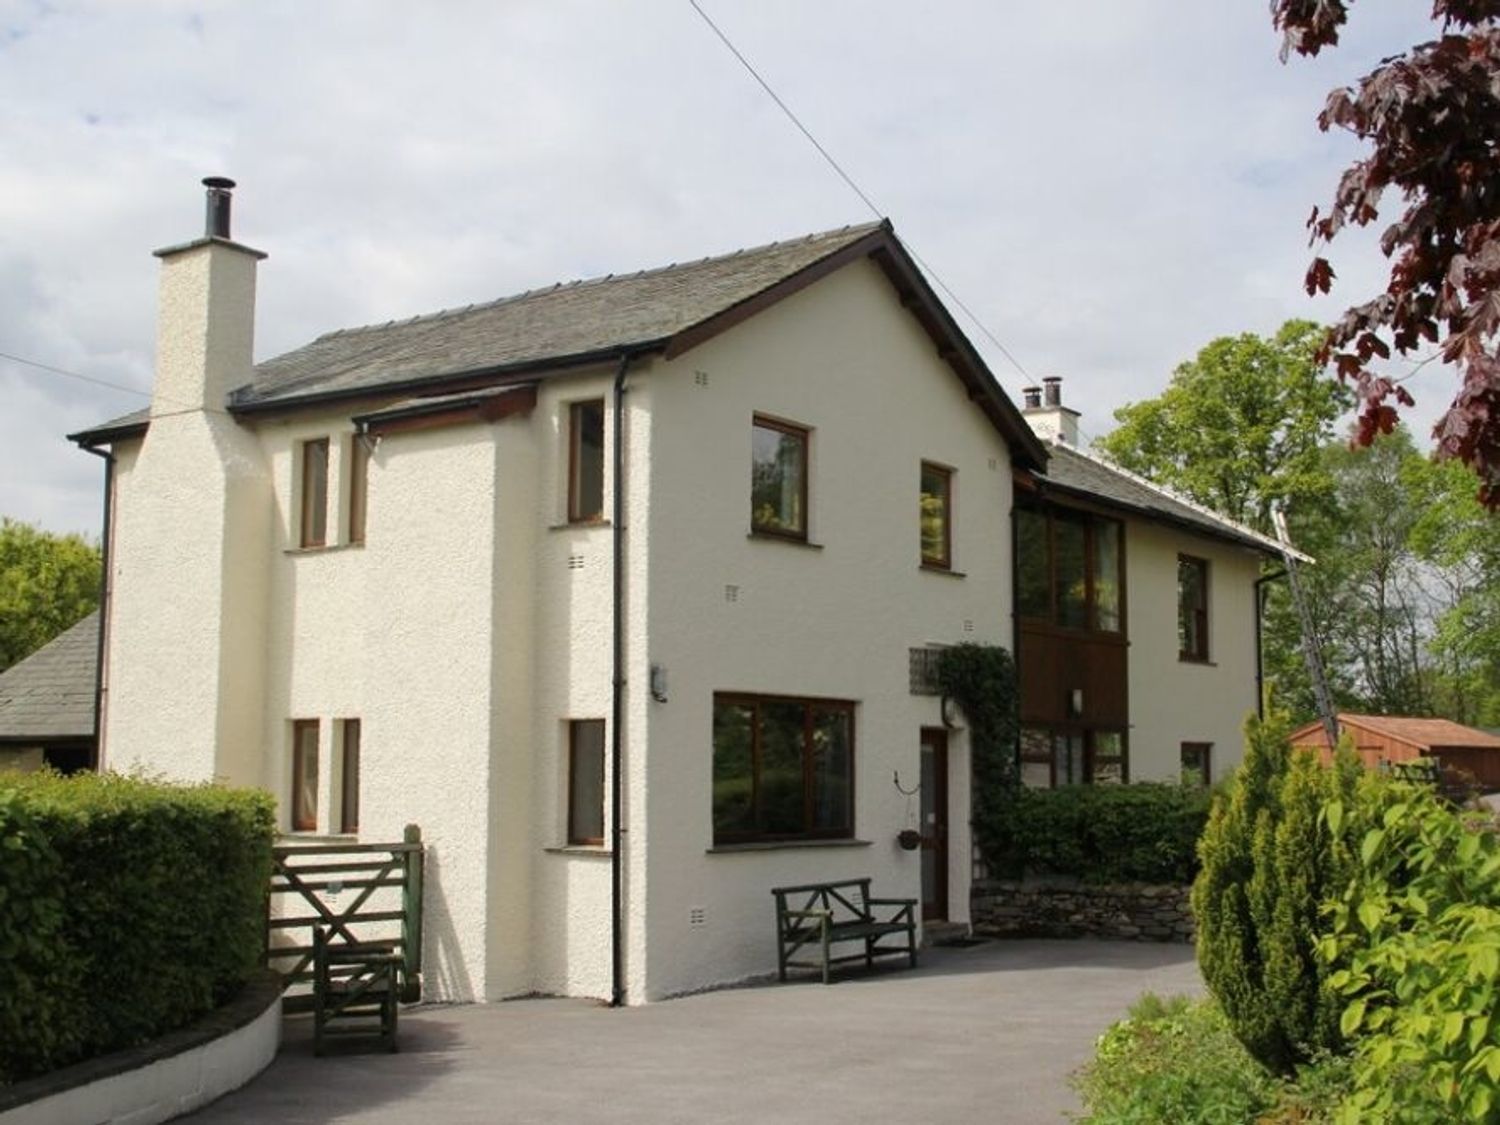 Greenbank Cottage Bownessonwindermere Winster The